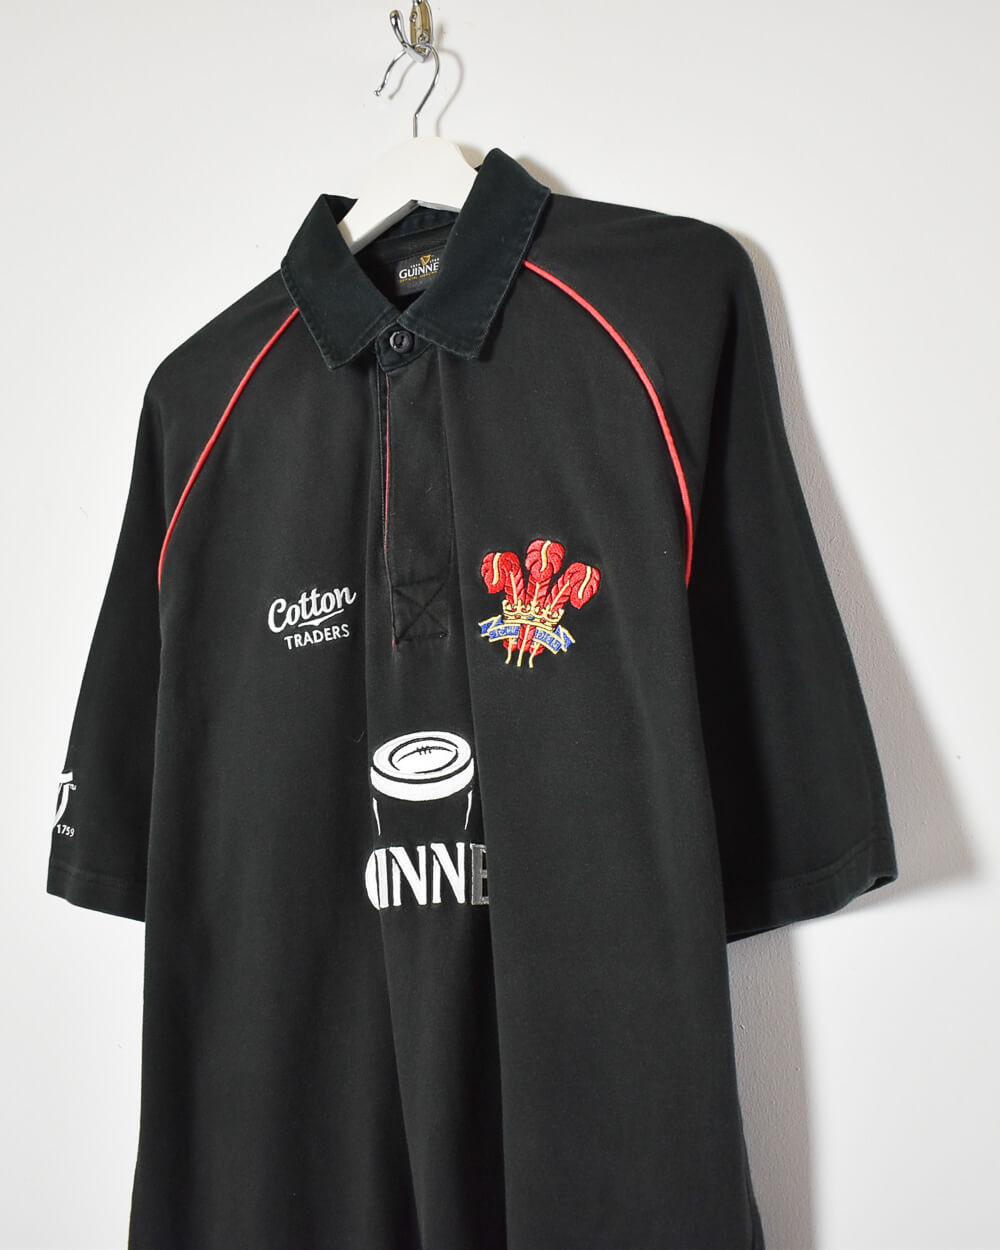 Black Guinness Short Sleeved Rugby Shirt - X-Large